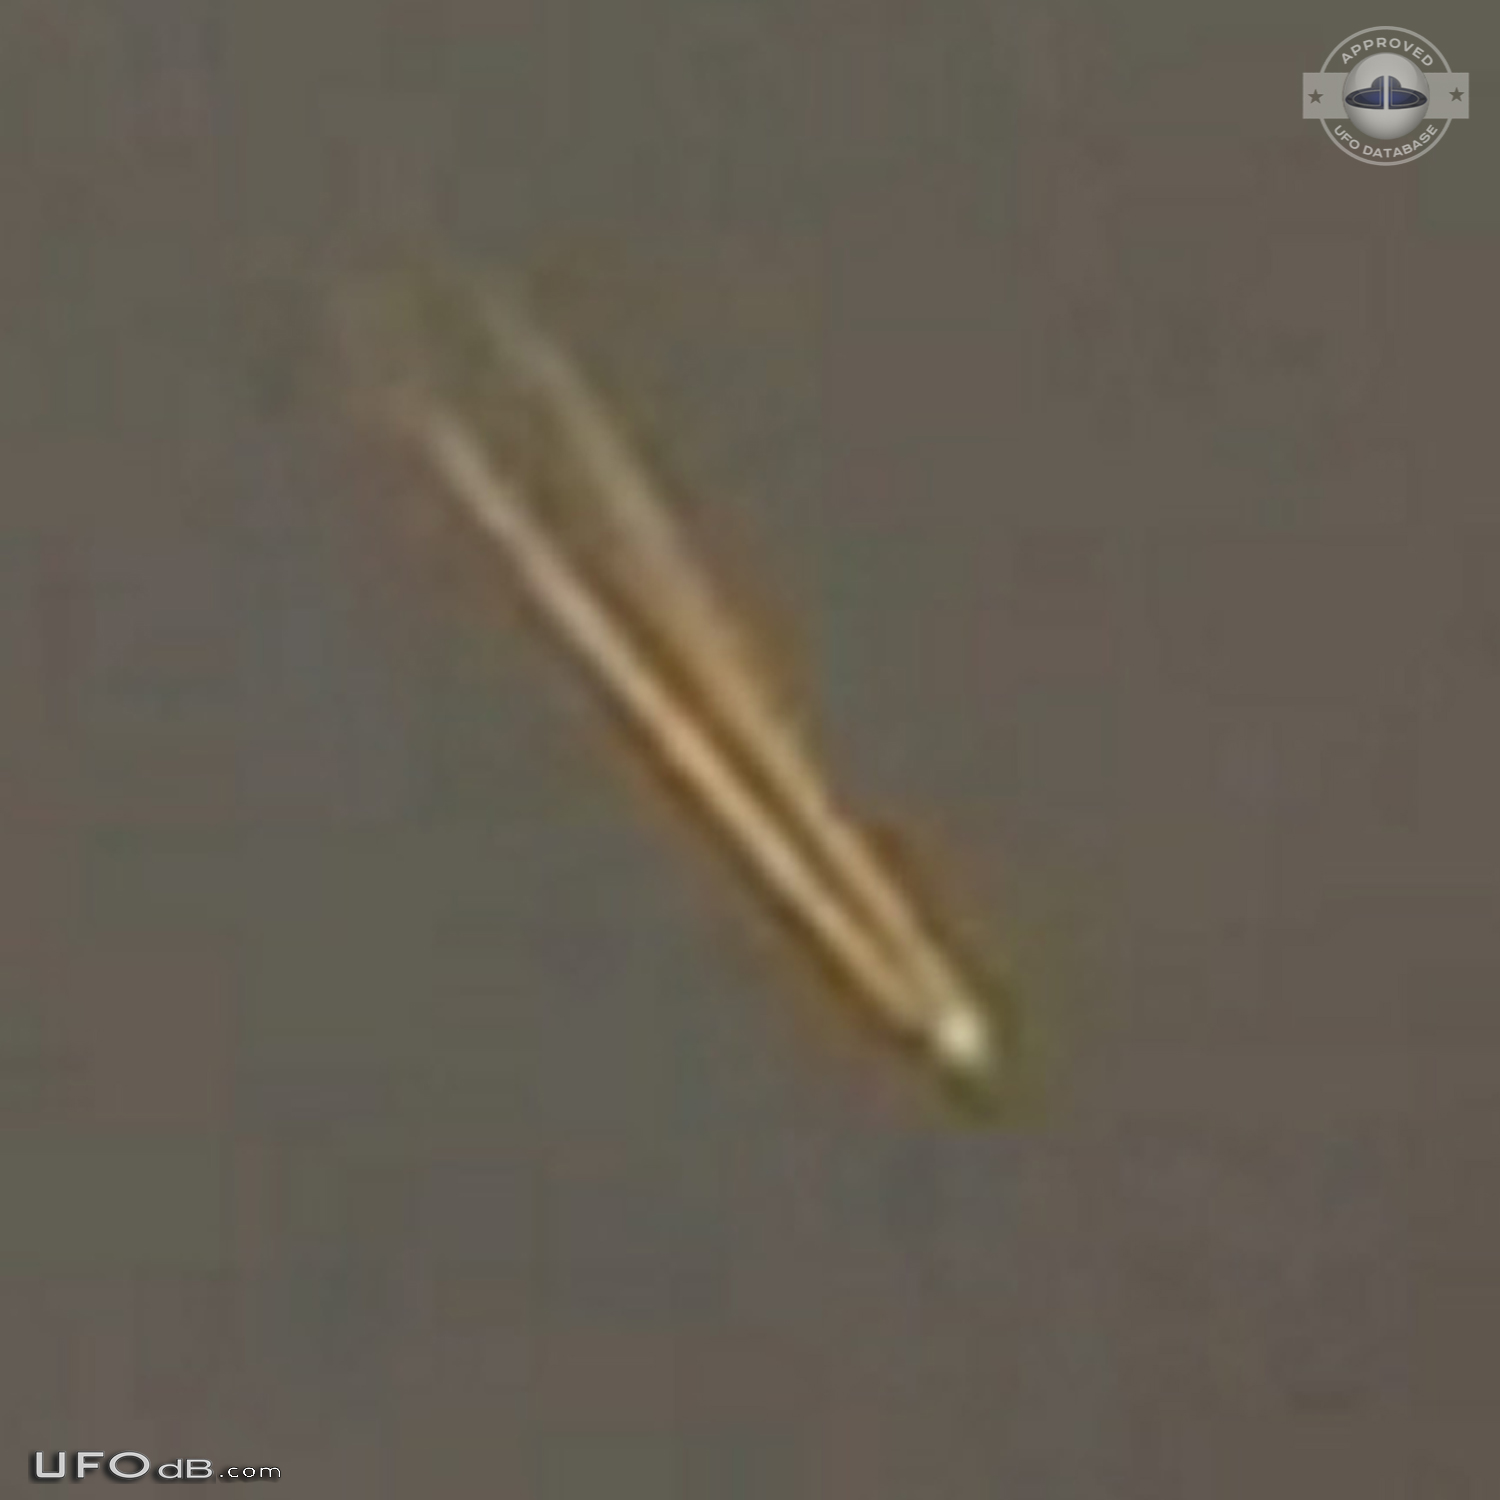 Thousands of people in Shanghai China saw a UFO with an Orange Tail UFO Picture #842-3